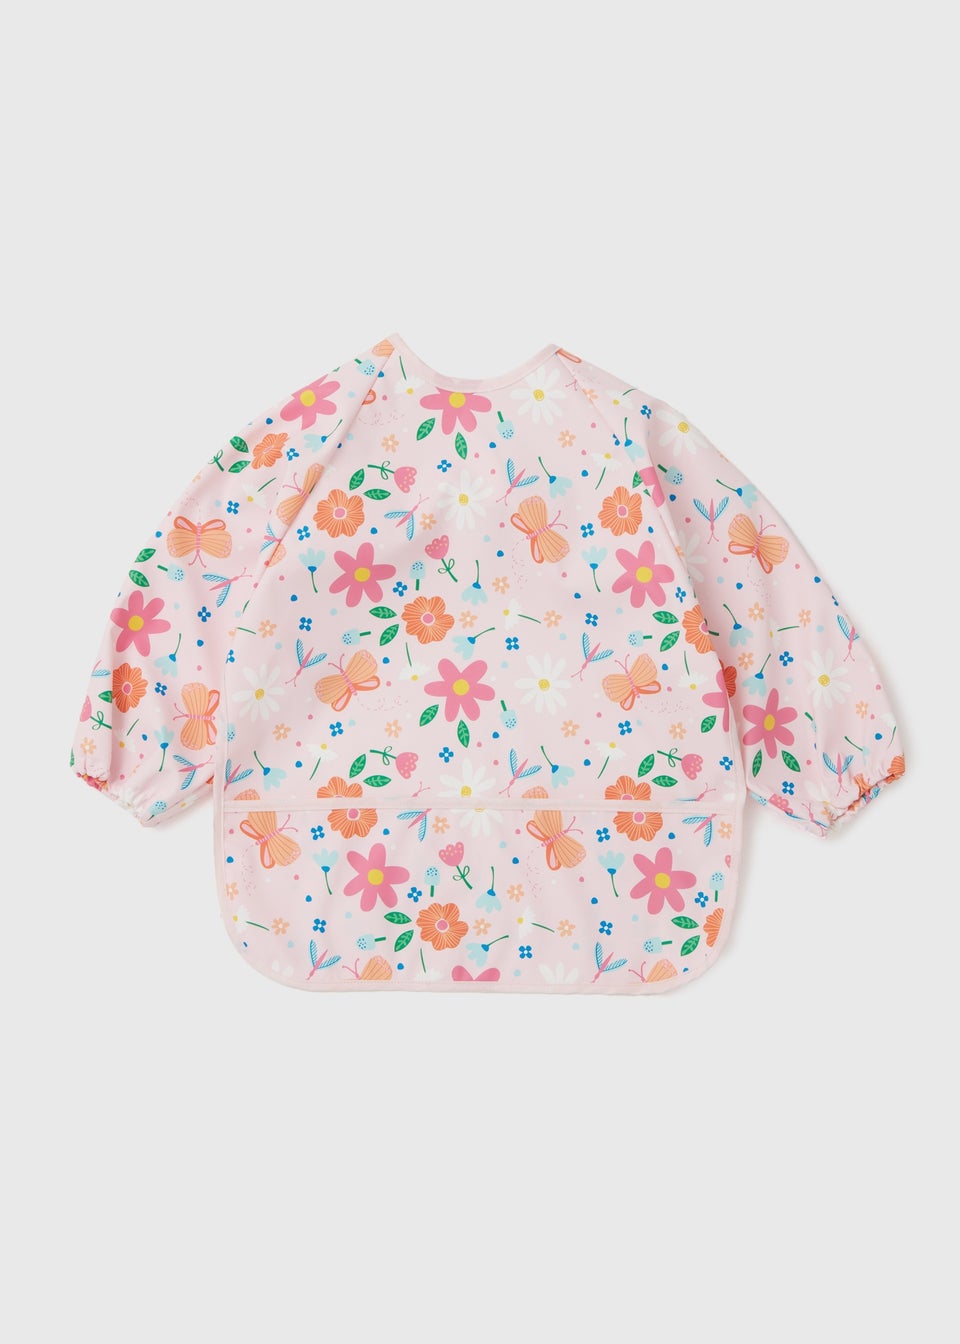 Baby Pink Floral Print Coverall Bib